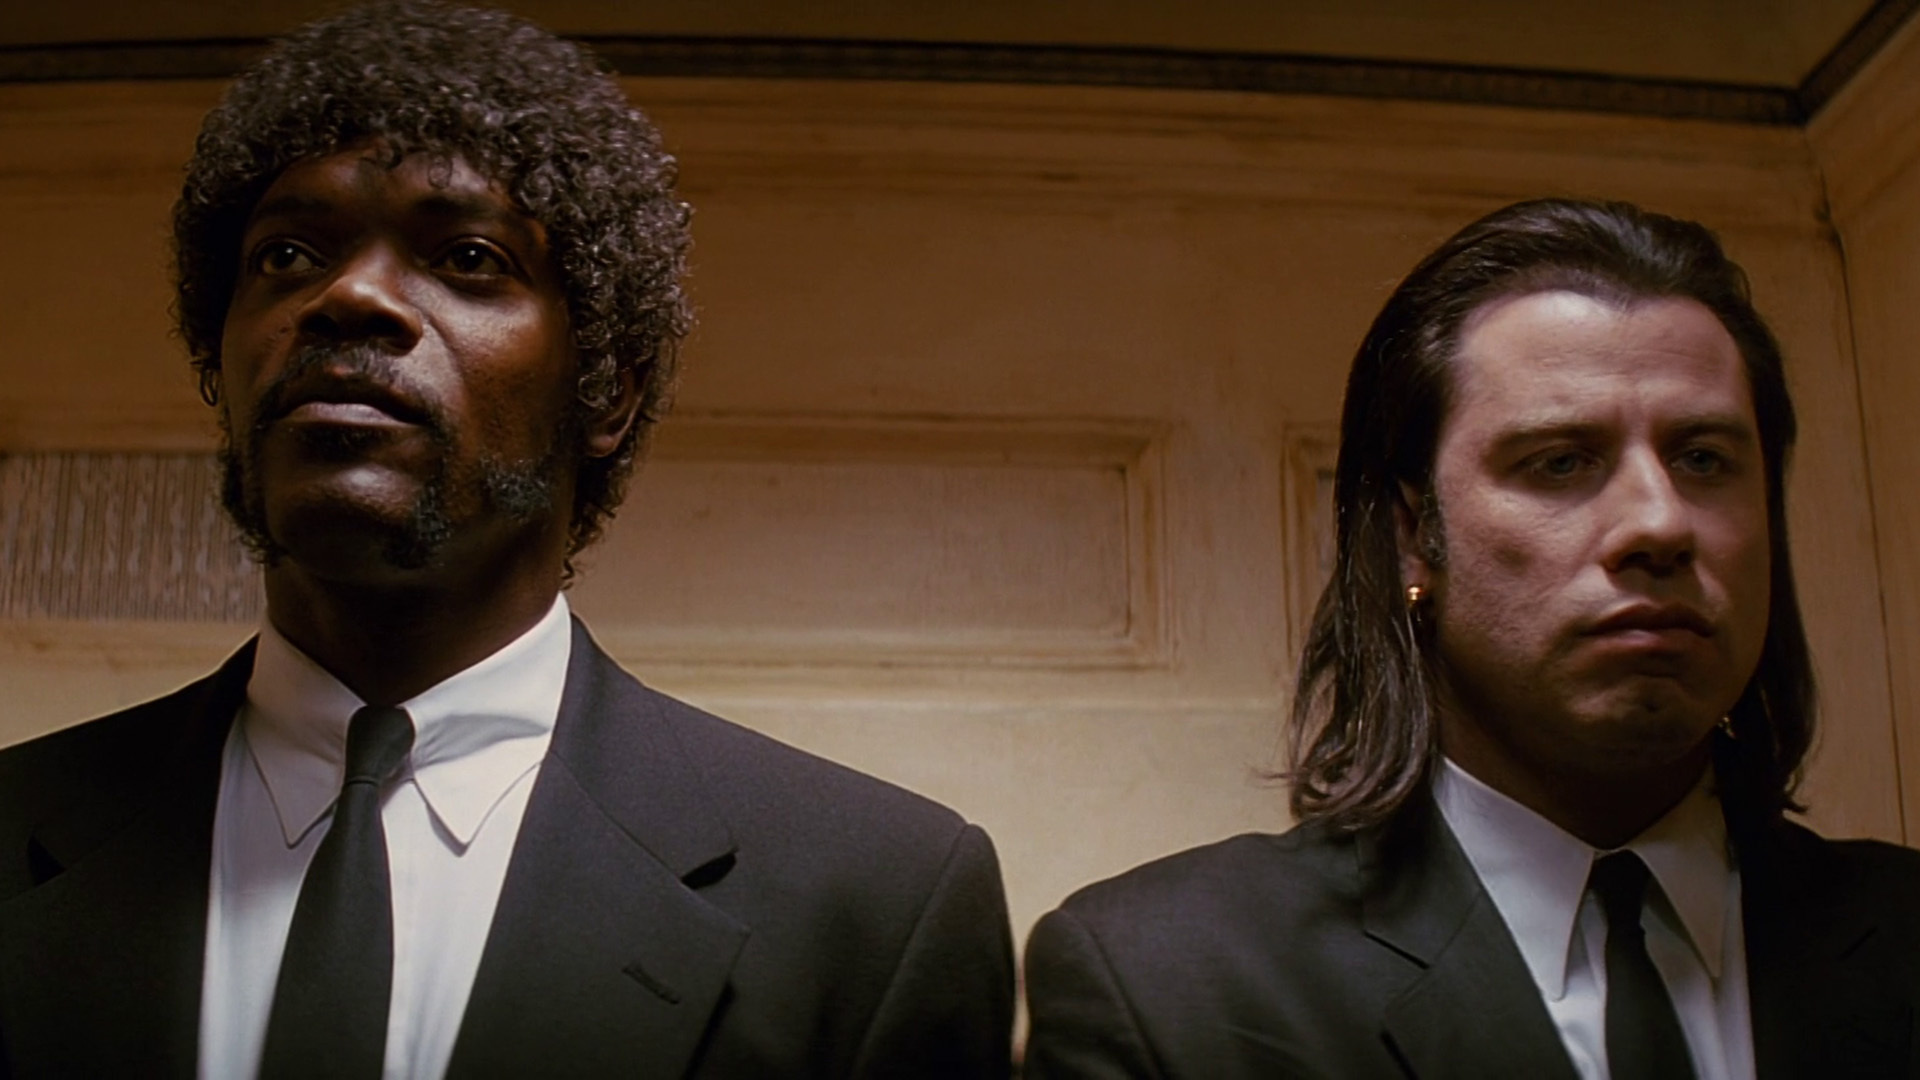 Samuel L Jackson and John Travolta wear black suits and ties in Pulp Fiction